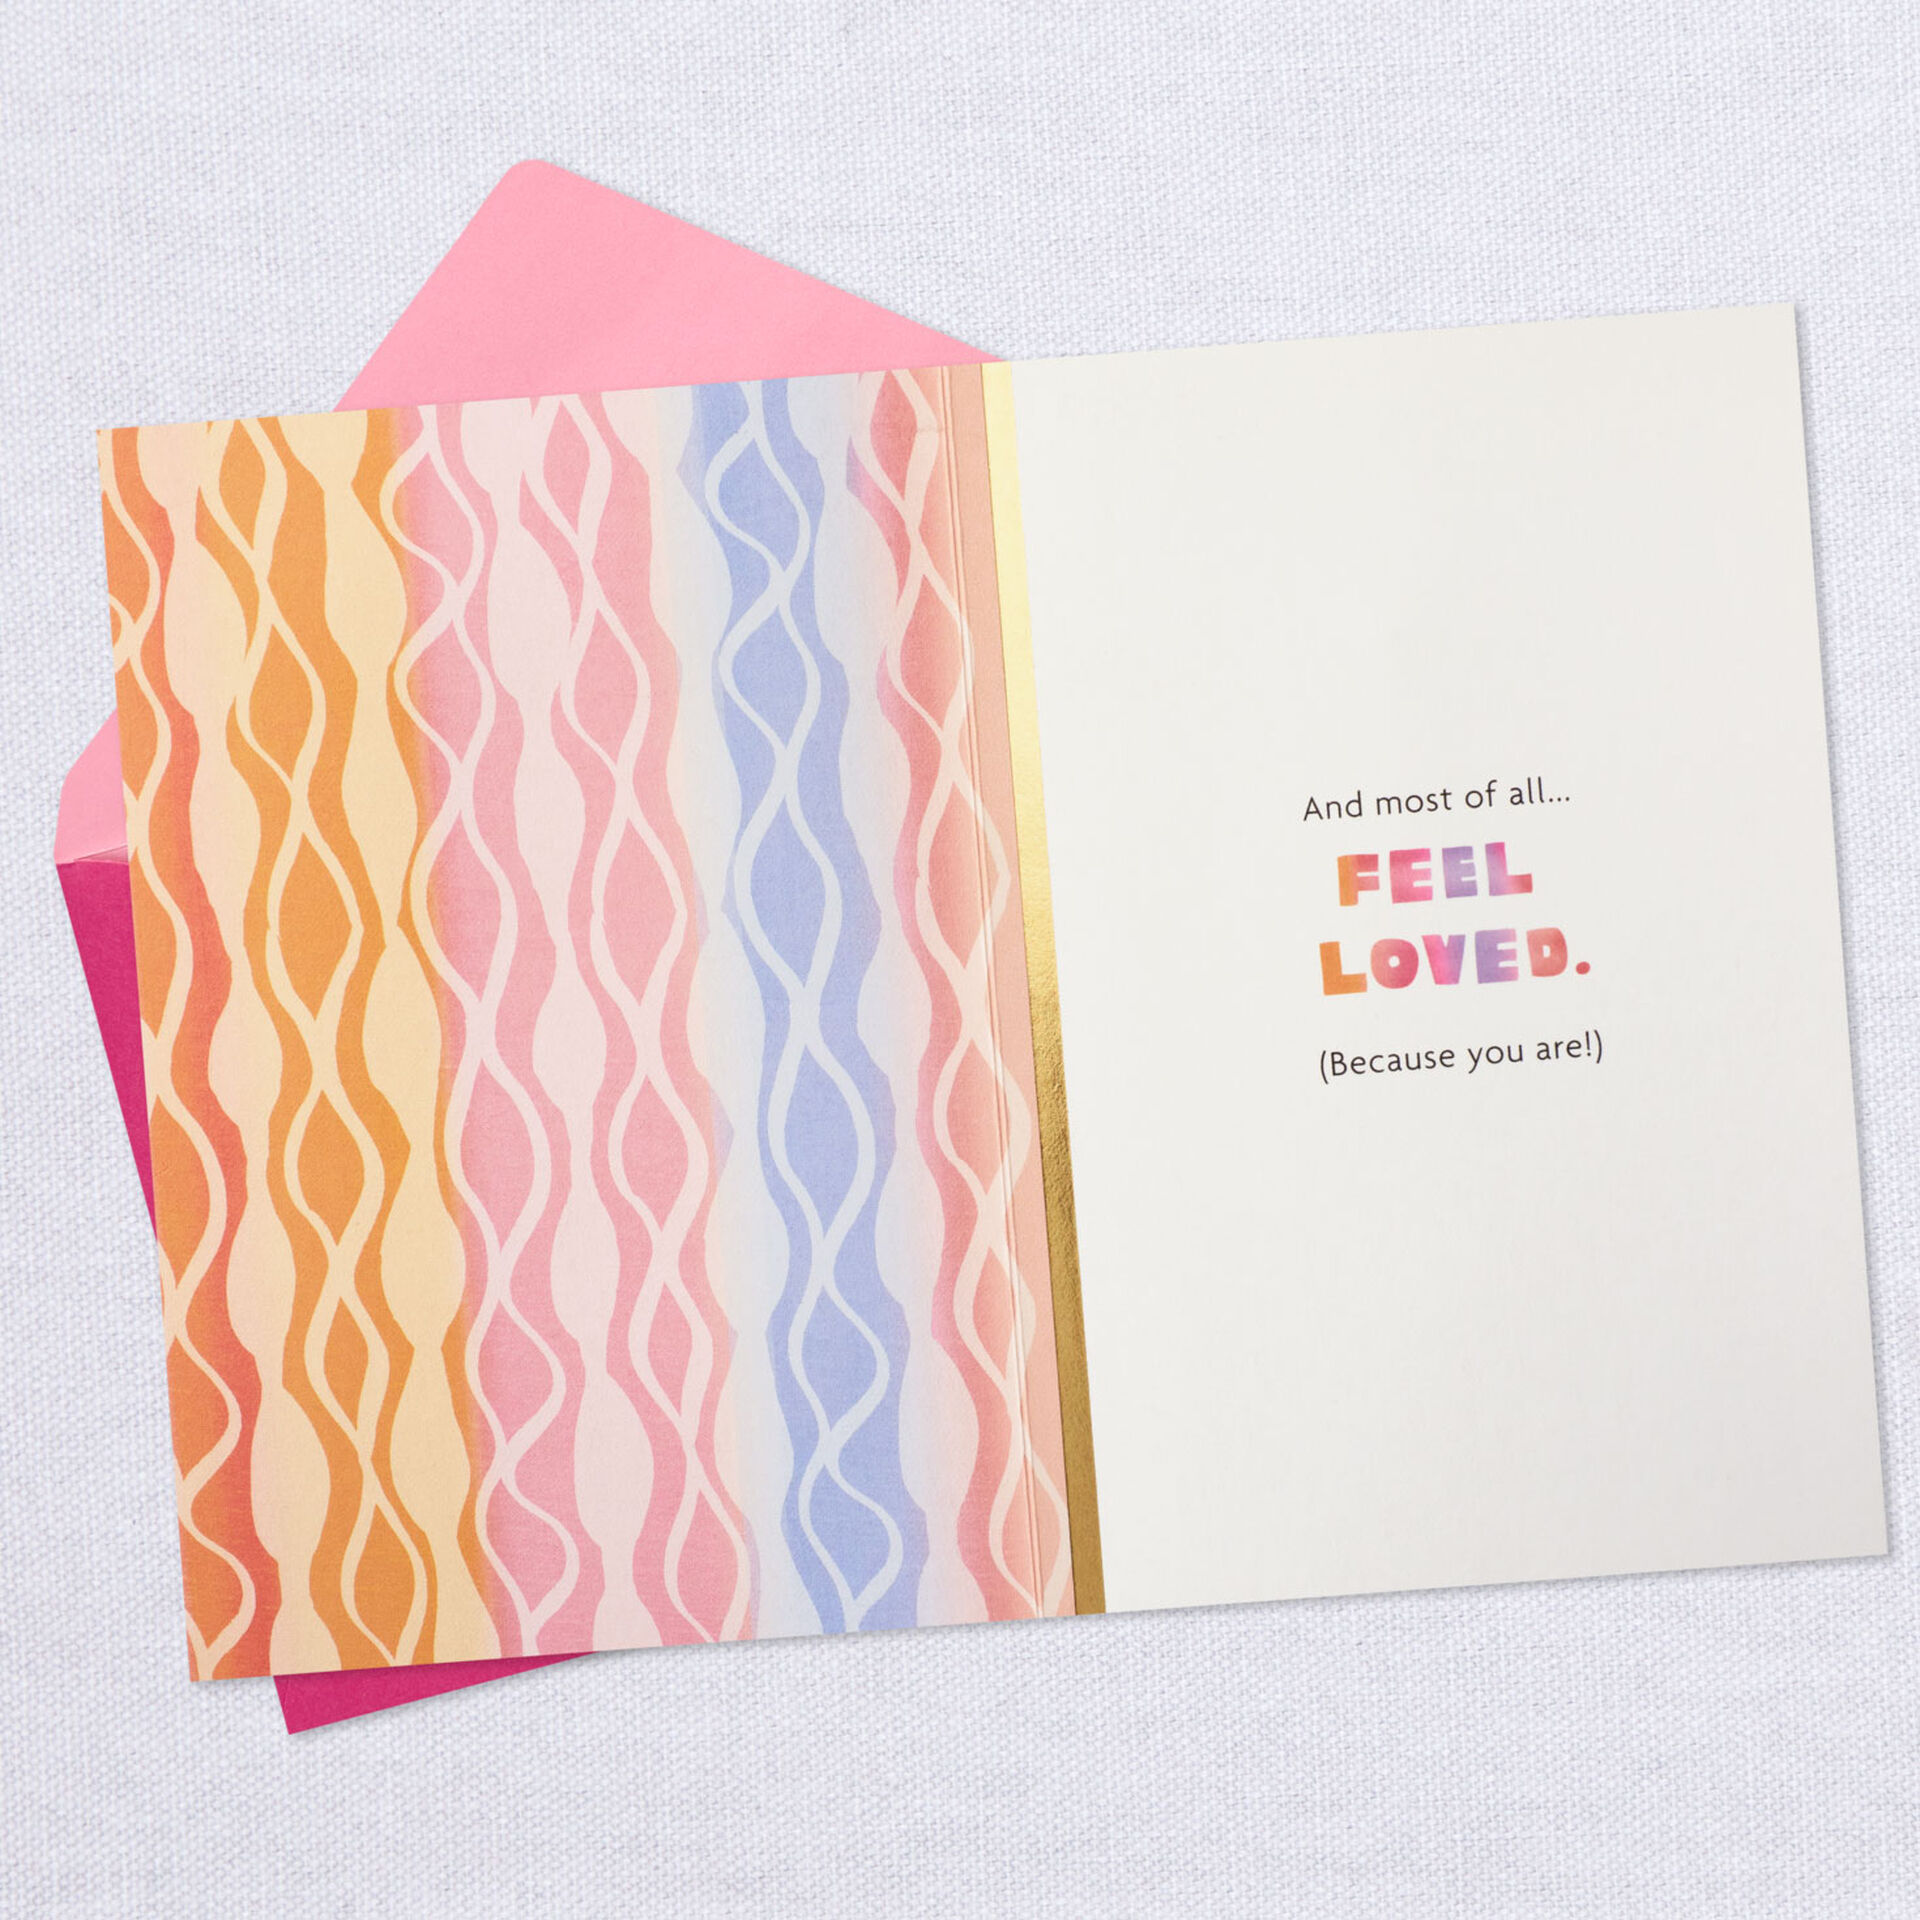 Extra-Happy-ToDo-List-Birthday-Card-for-Her_499HBD3621_03